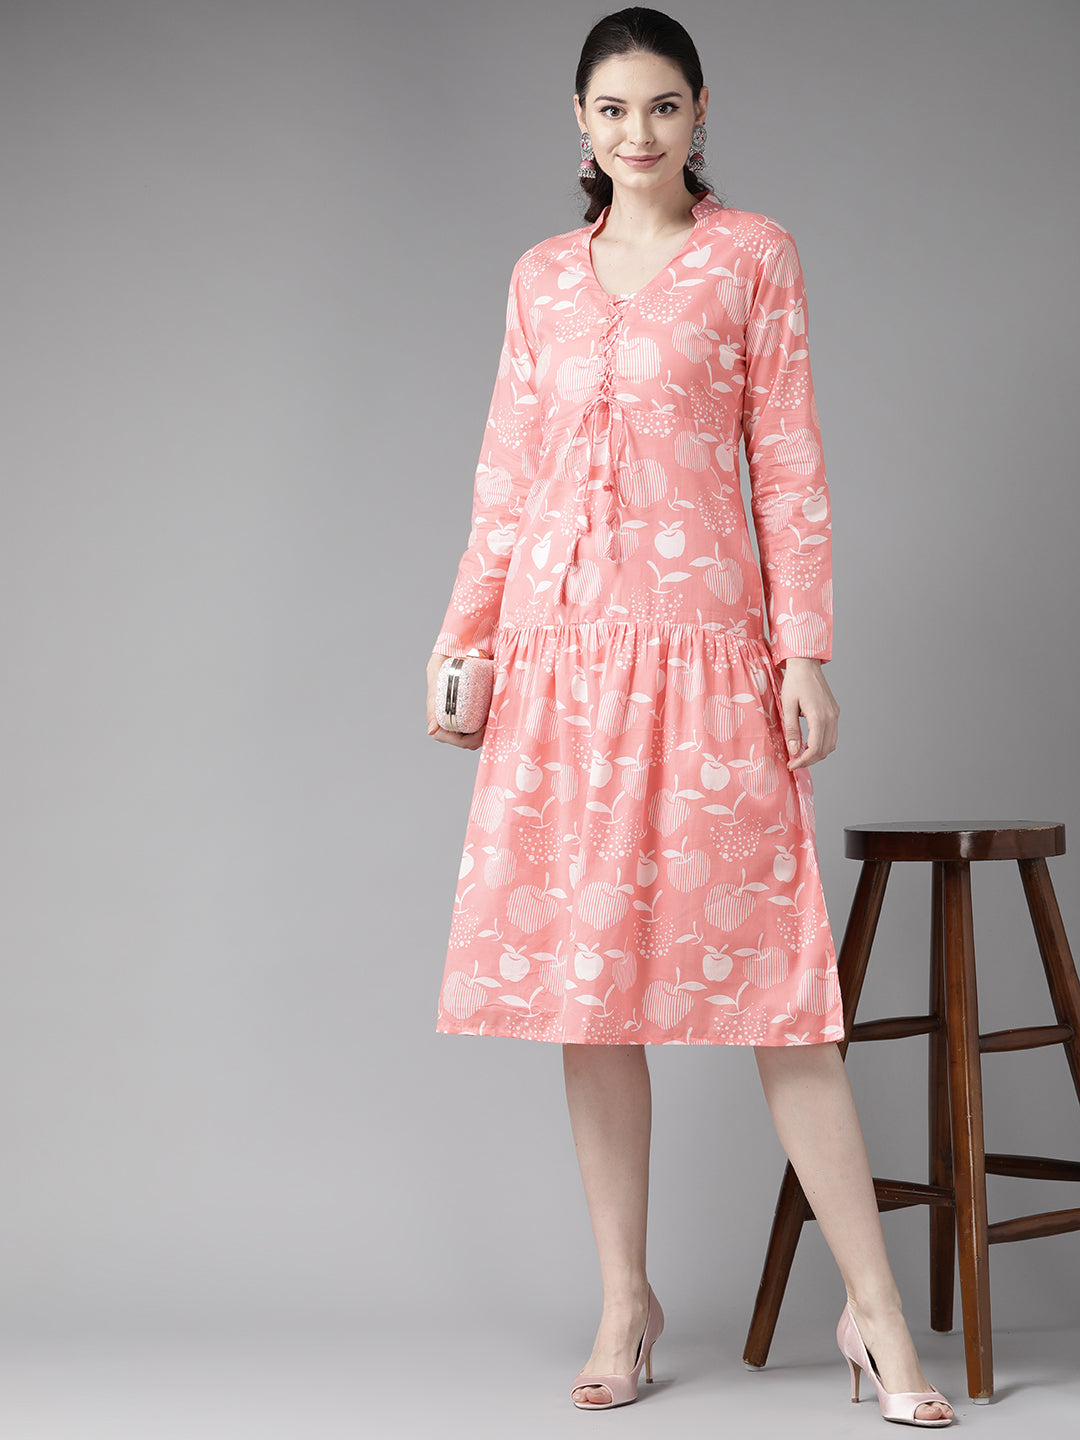 pink-white-apple-printed-tiered-dress